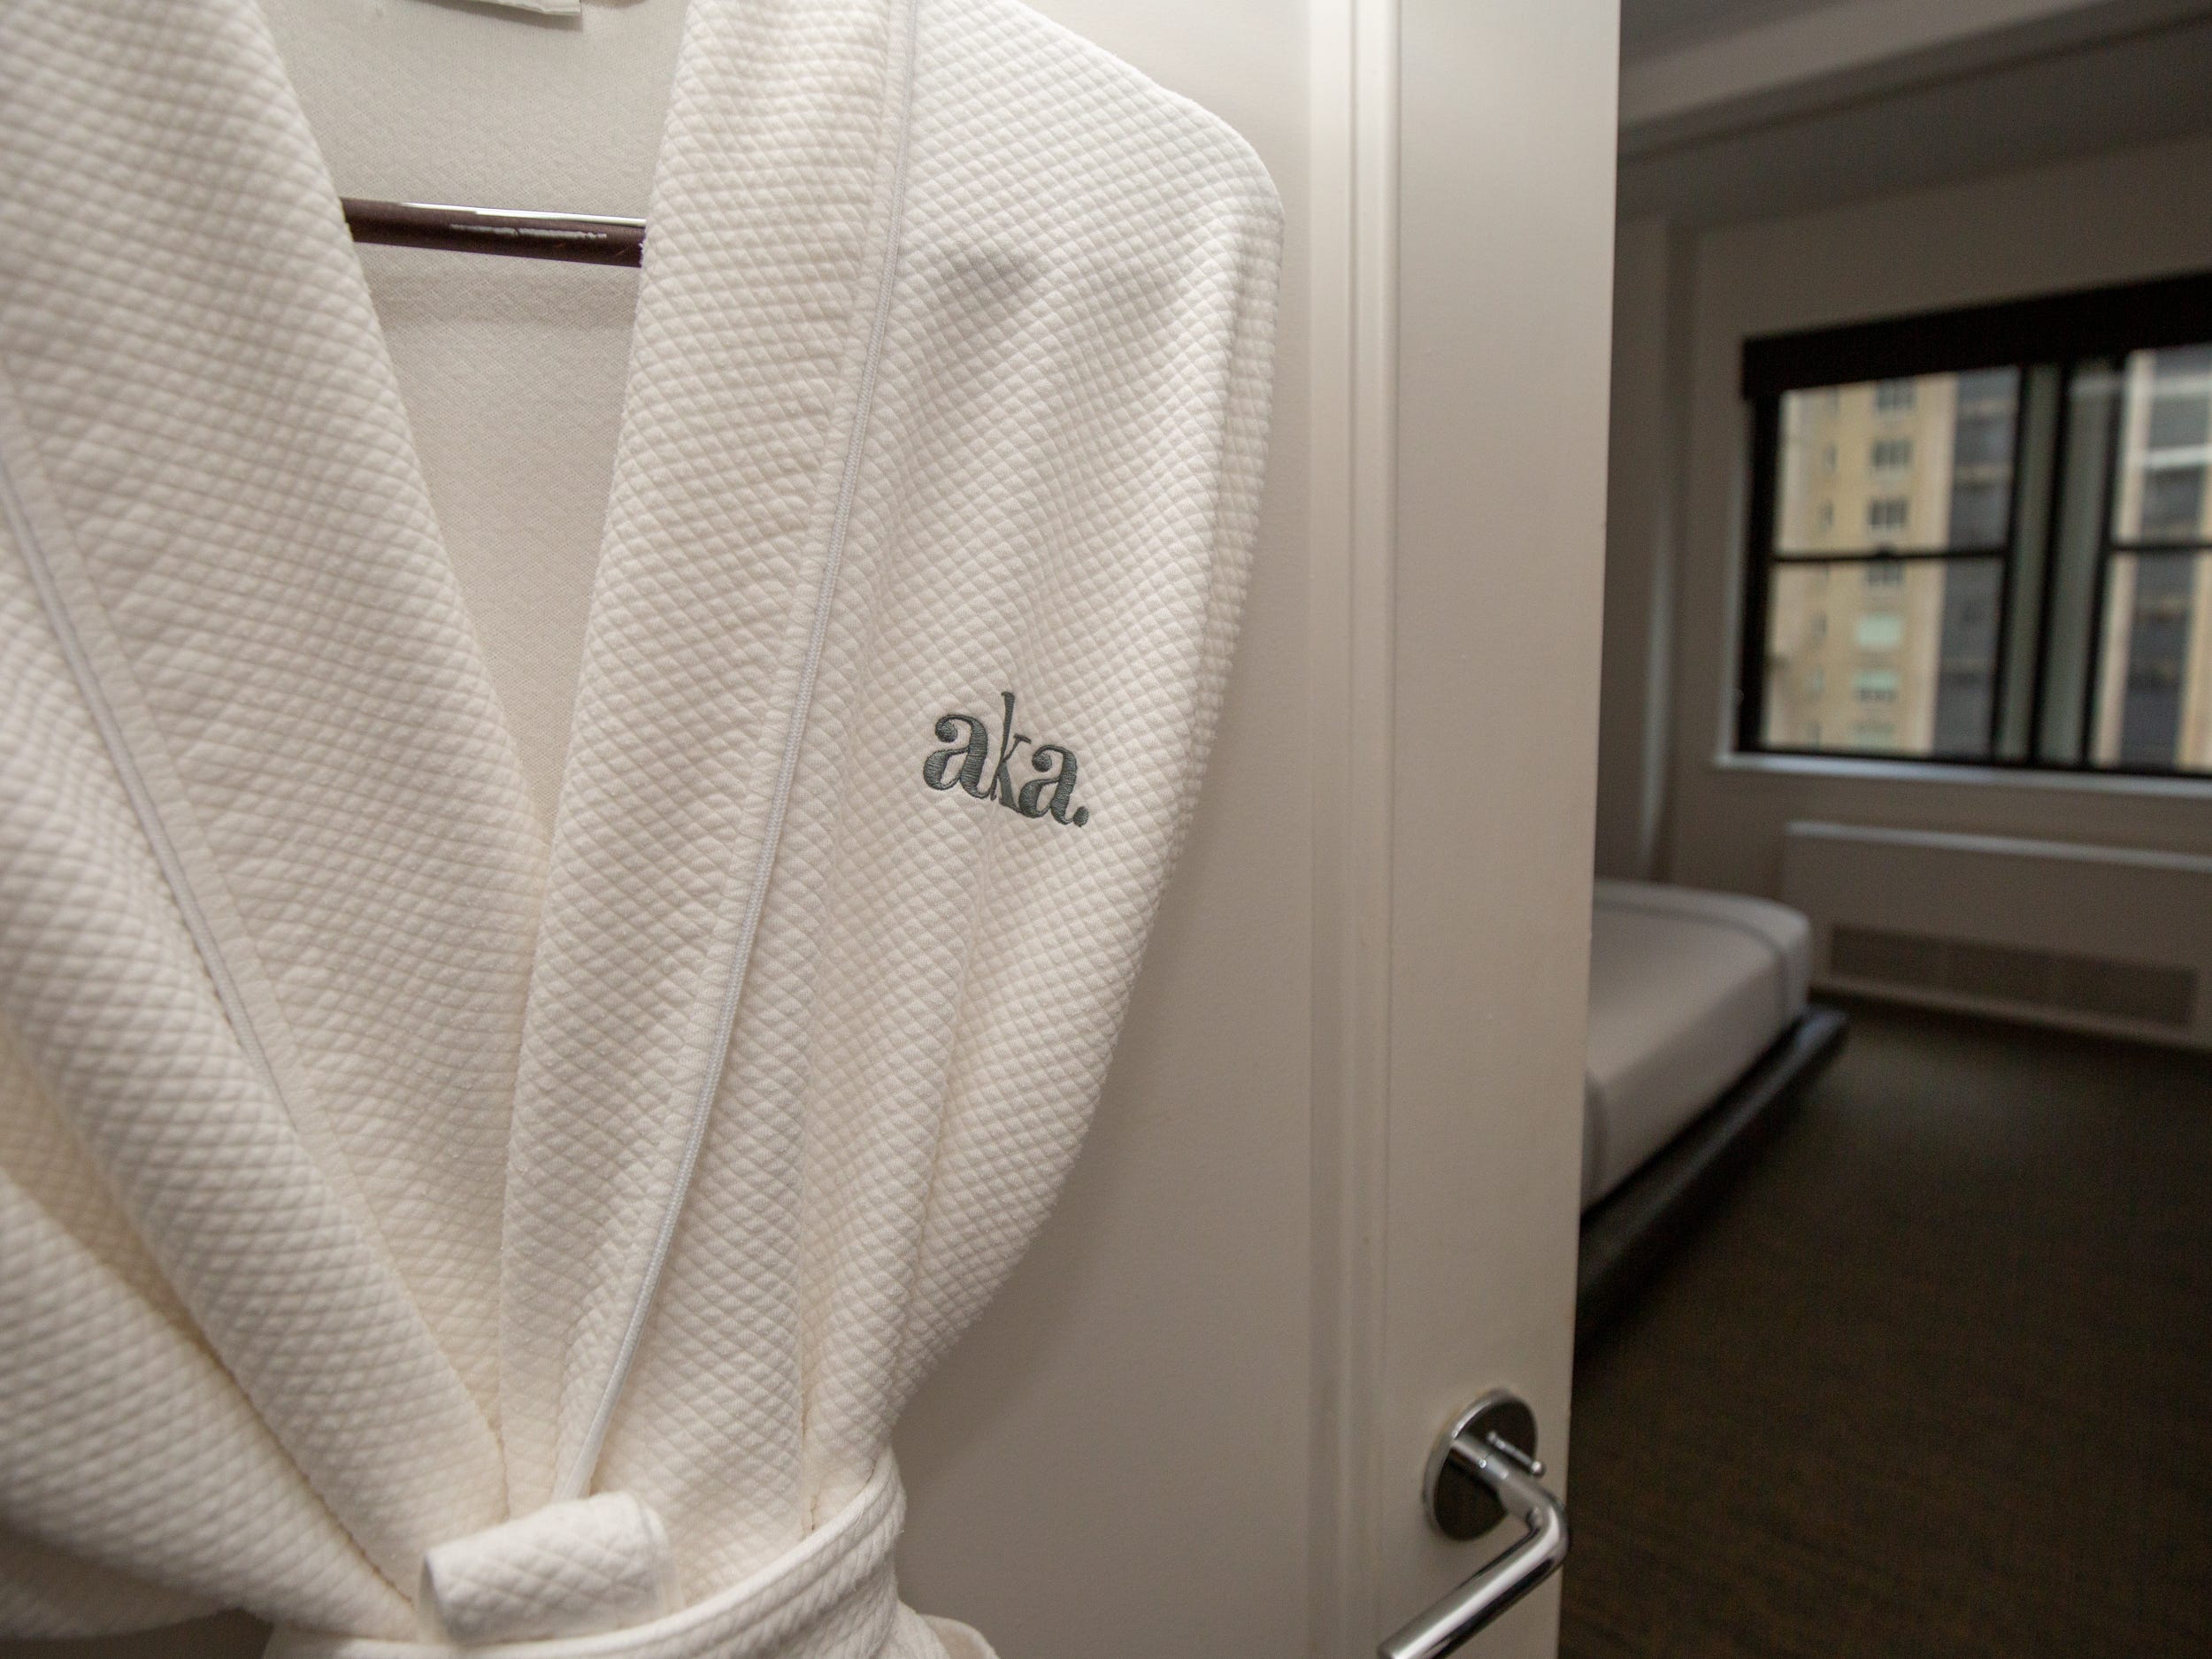 A robe with the "aka" logo hanging on a door.